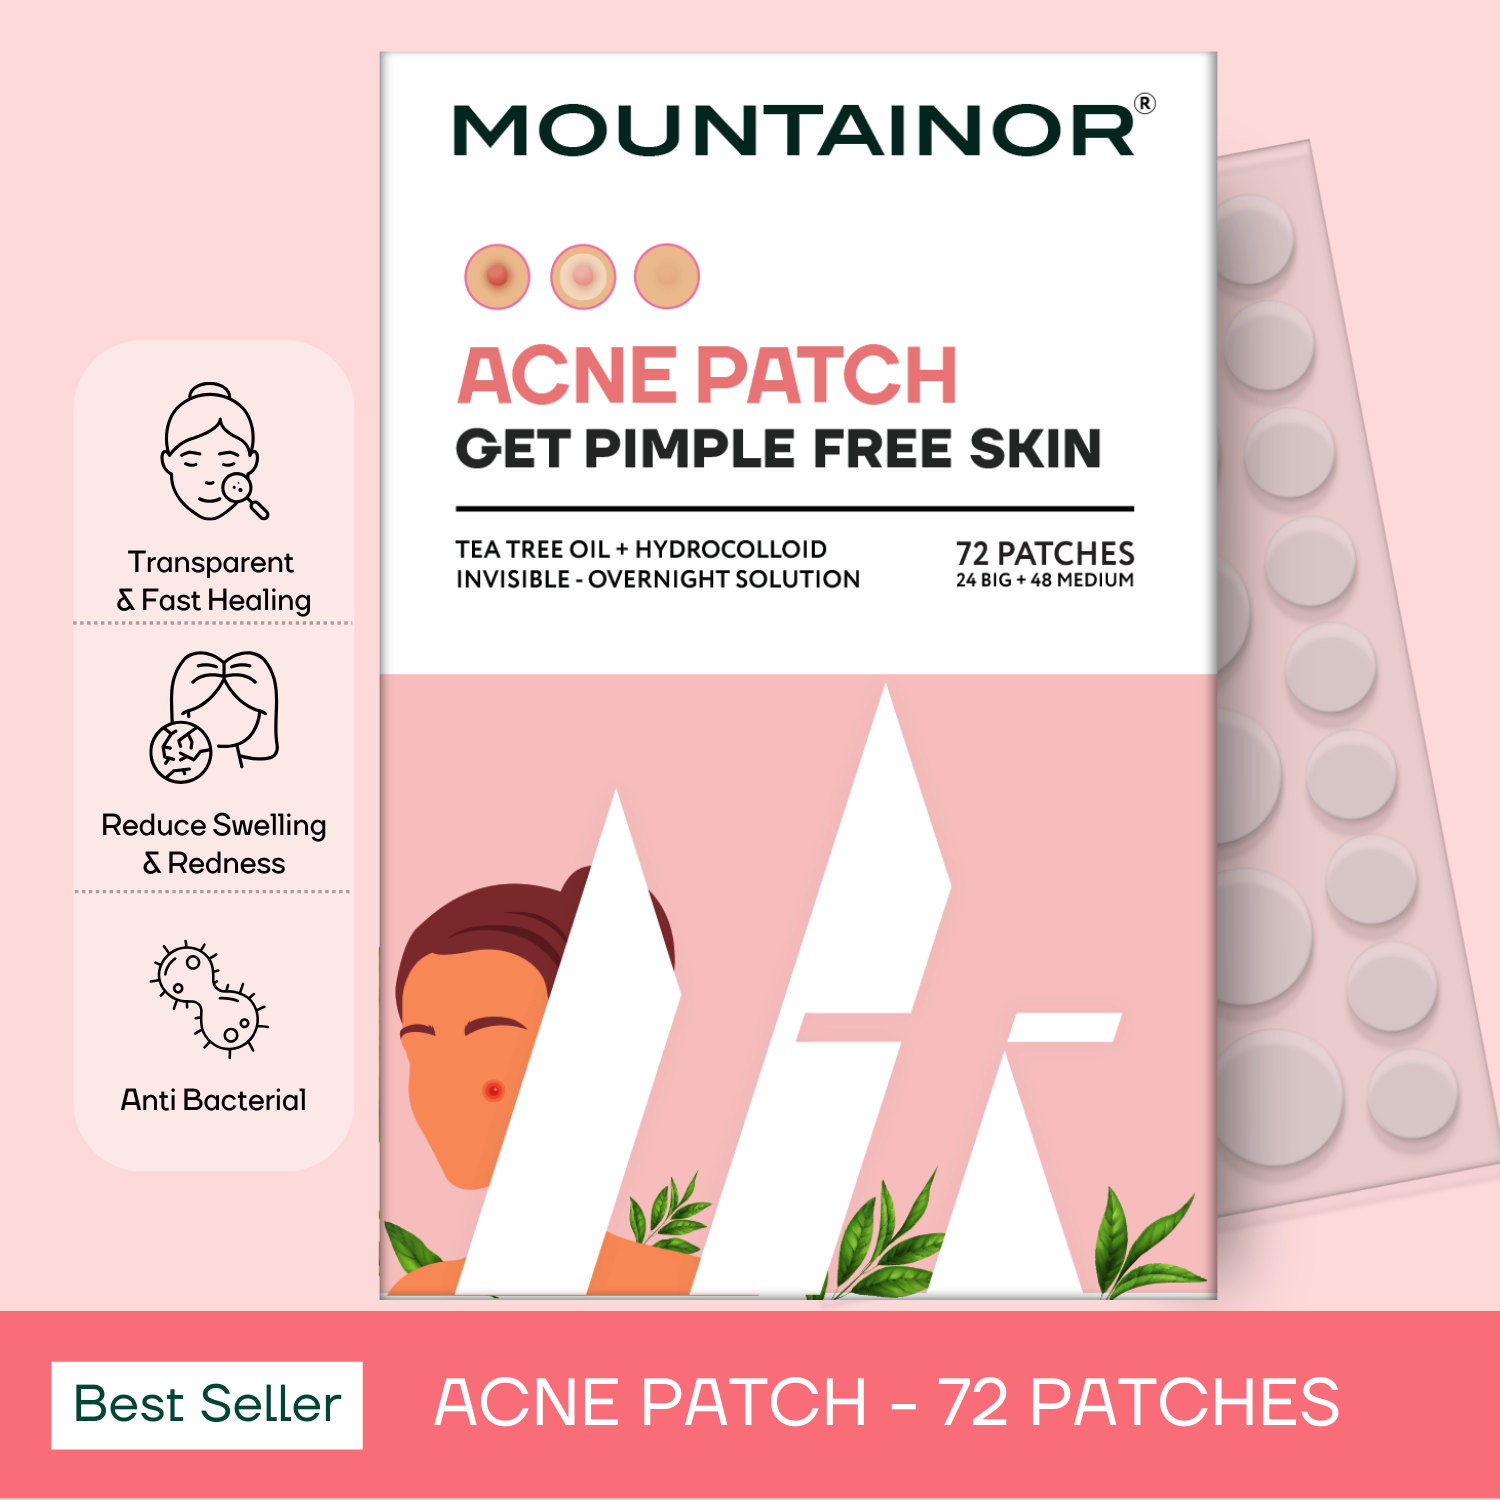 Acne Pimple Patch - 72😊 Hydrocolloid Patches for Clear, Blemish-Free Skin